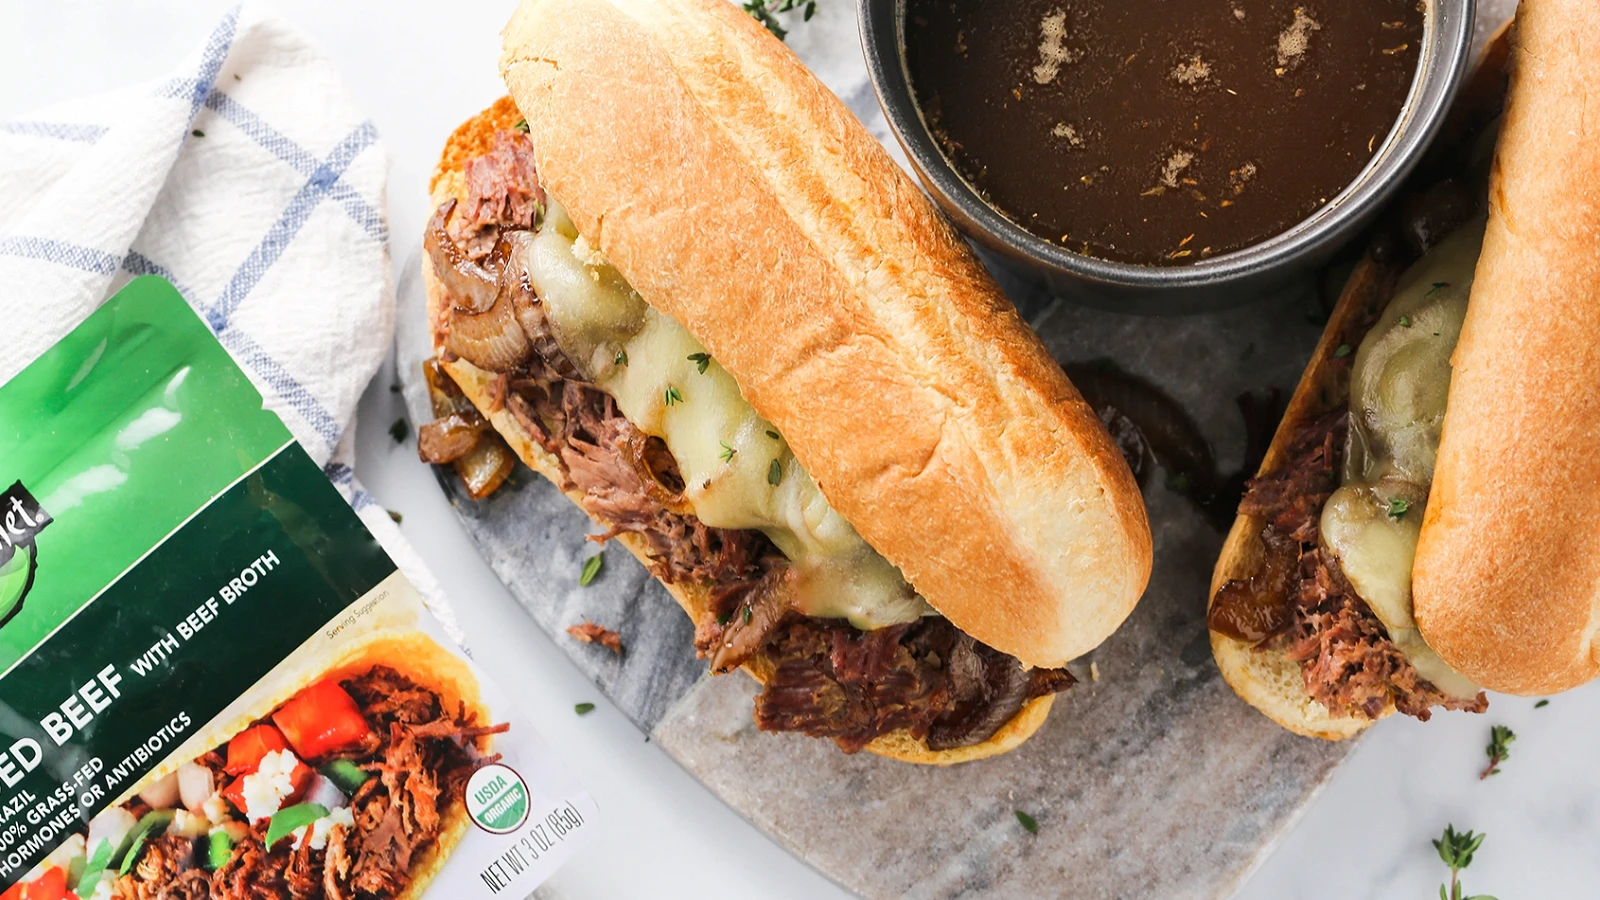 Image of French Dip Sandwiches